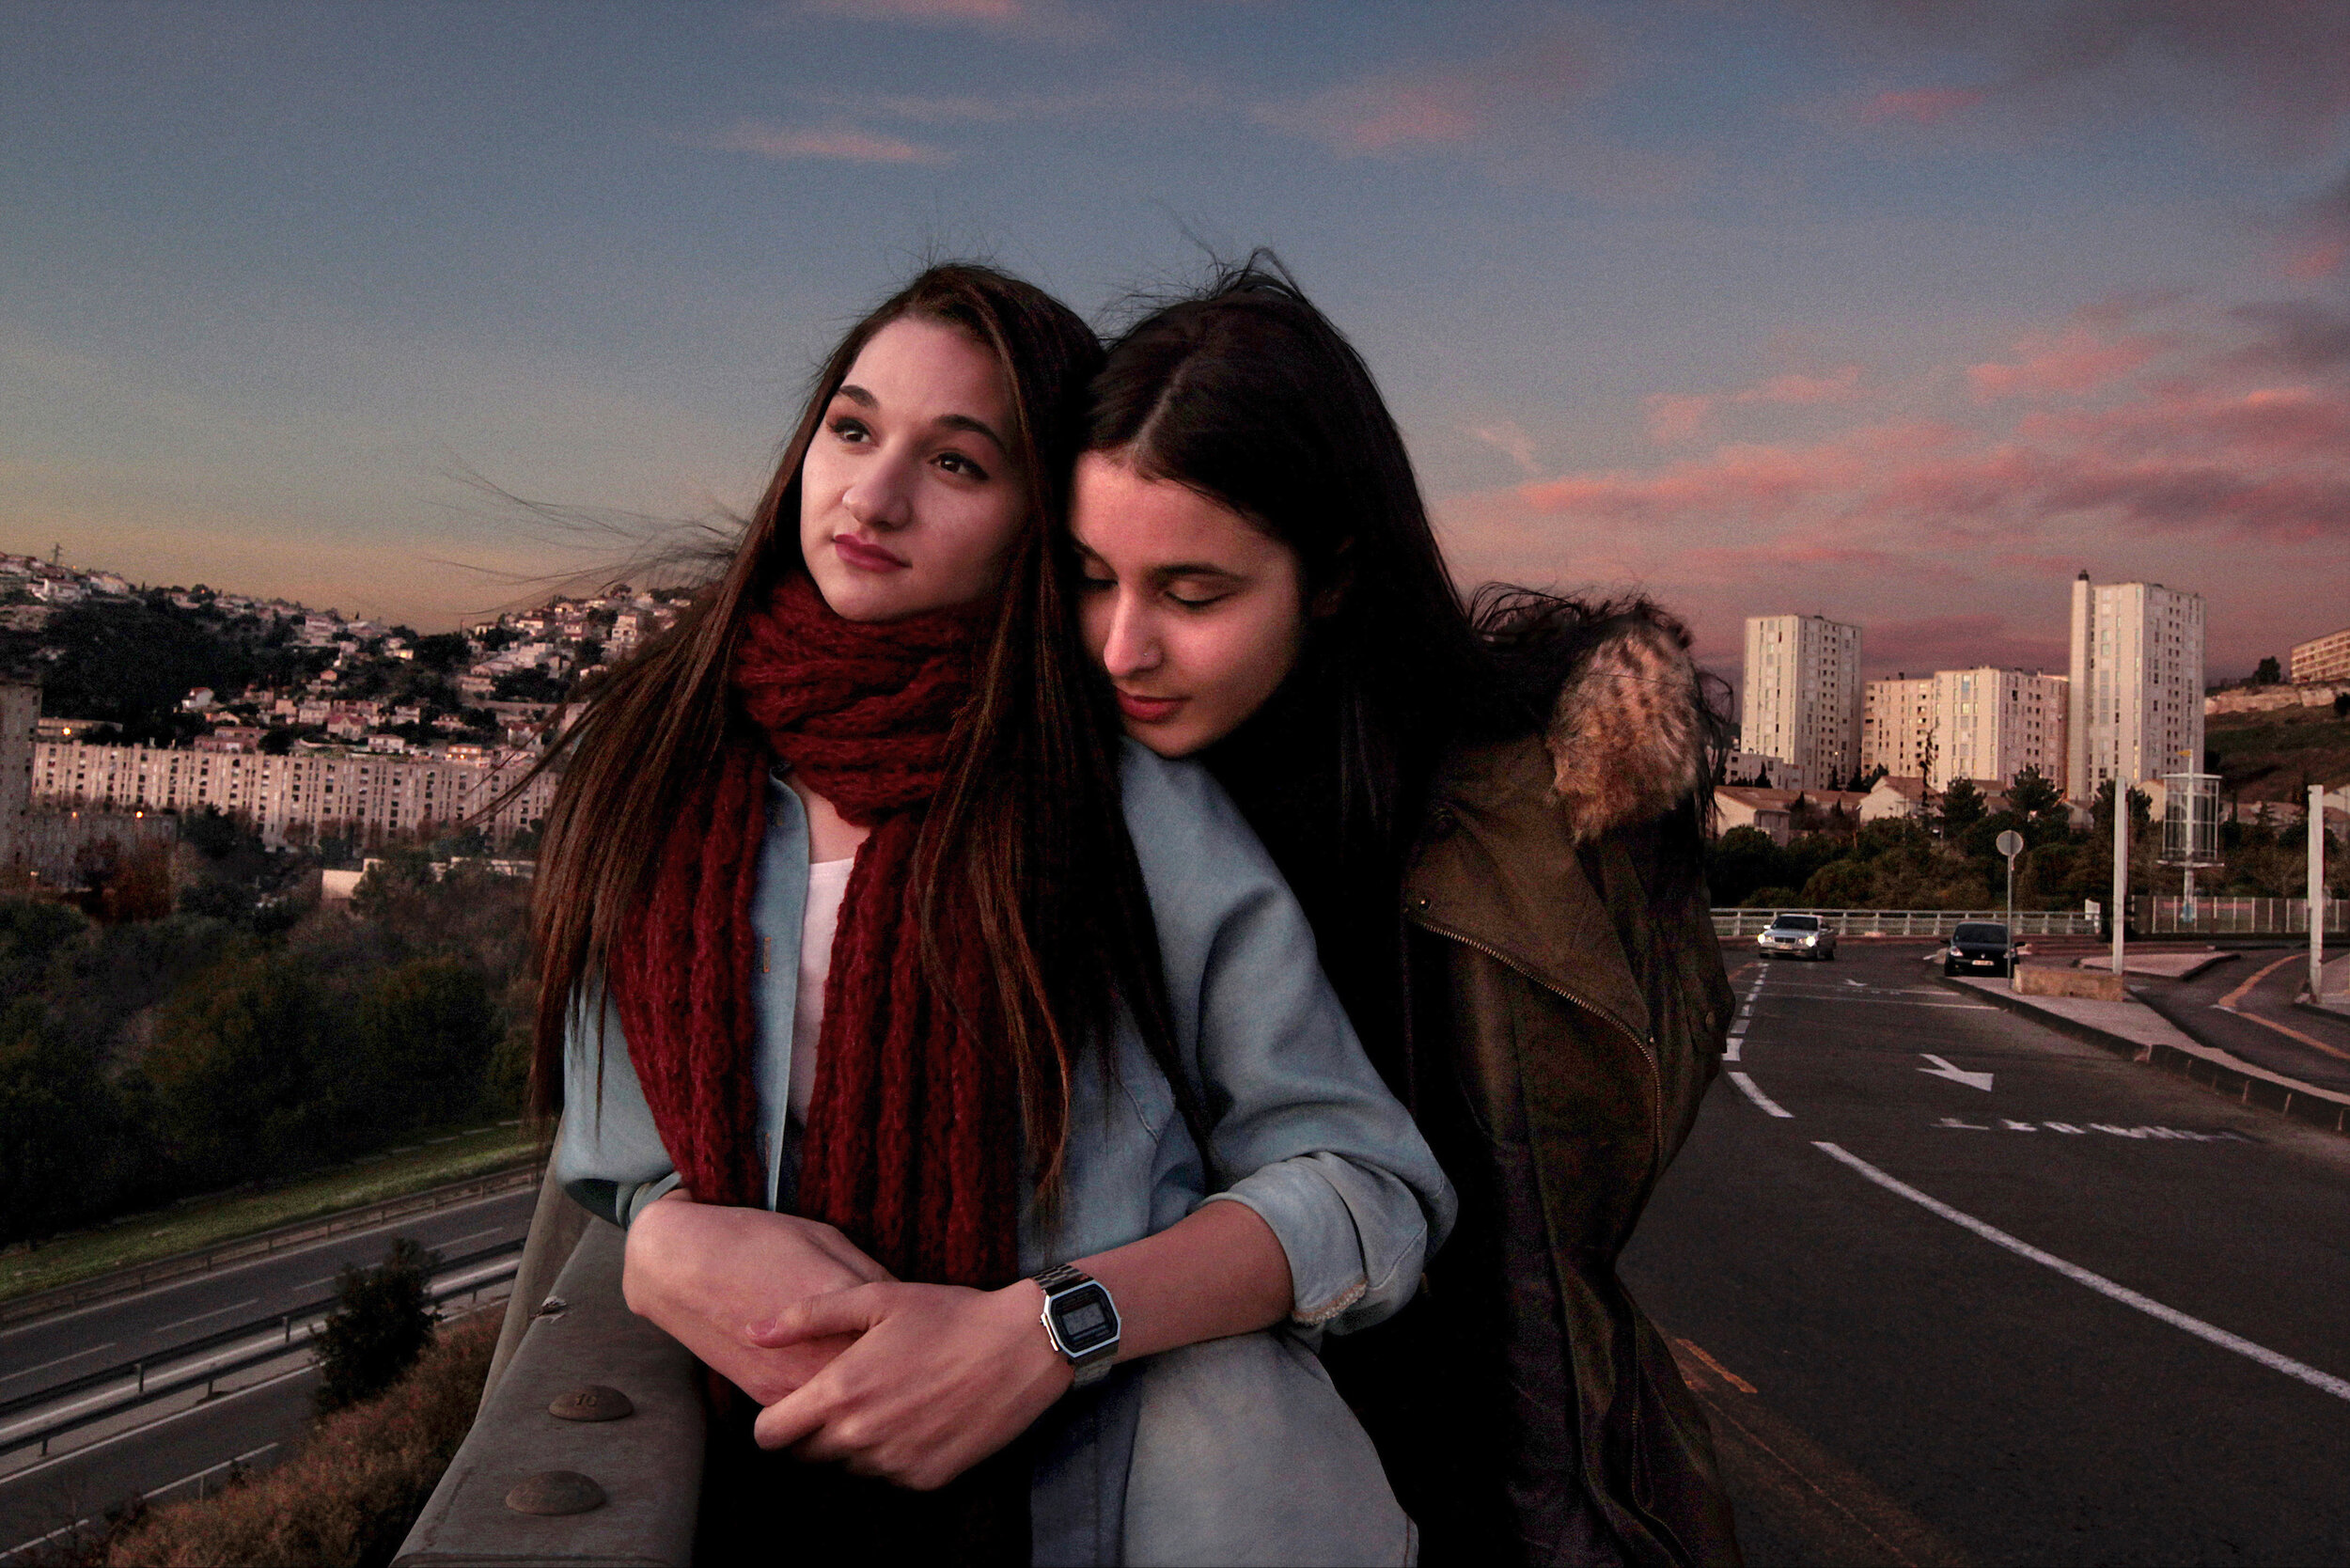   France. Marseille. 2013. Sofia [left] and Fatima had to wait for more than an hour before Sofia’s brother could finish work and come to pick them up from a shopping mall. The northern districts of Marseille, where a majority of the city’s Muslim po